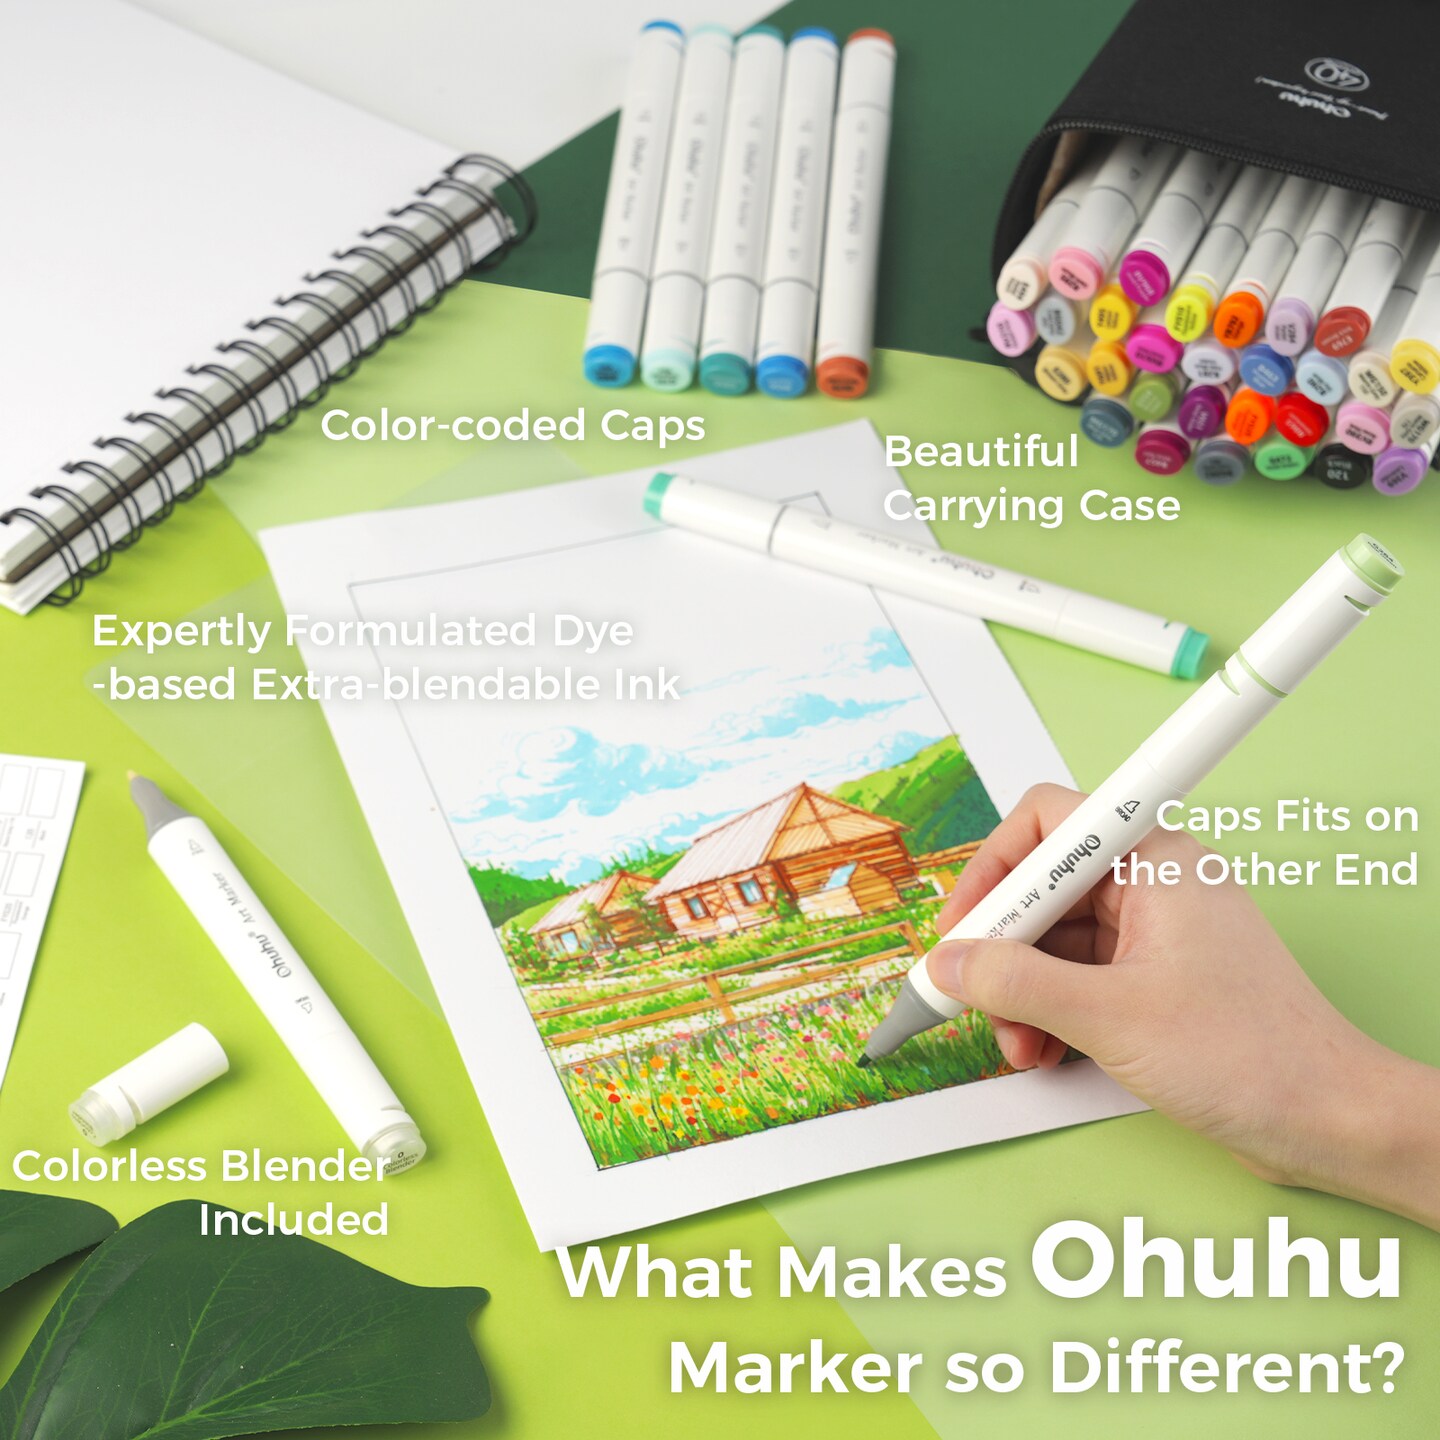 Ohuhu Oahu 40 Colors Markers, Chisel and Fine Tip Markers, Alcohol Markers, Sketch Markers for Coloring Book Sketch Illustration